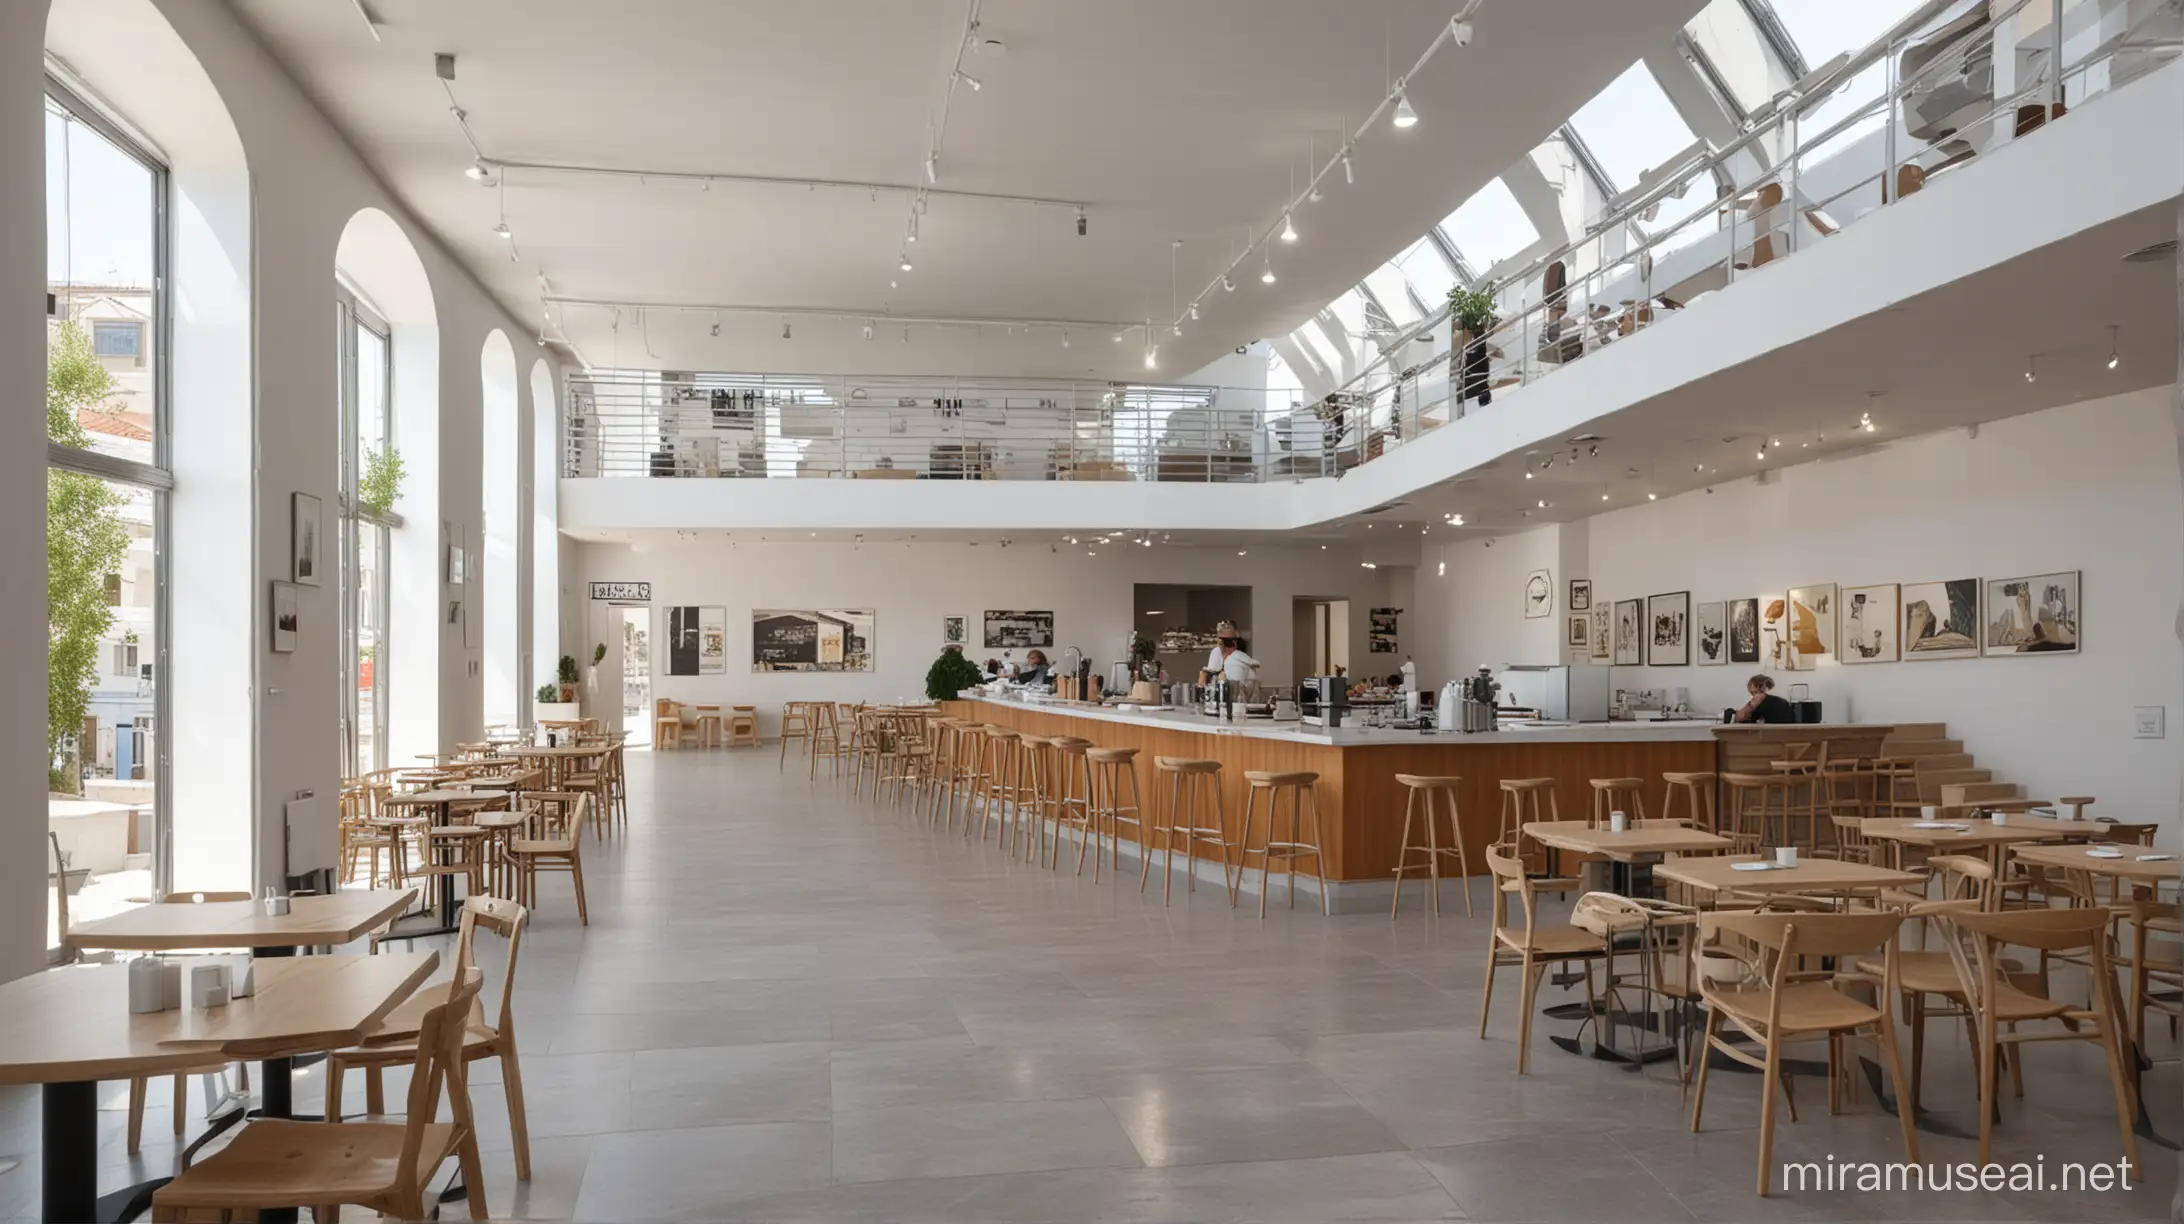 Apply modern architecture and Greek architecture to a museum cafe. Indoor. There is a mezzanine on the upper floor. There is a service stand in the corner of the room.
